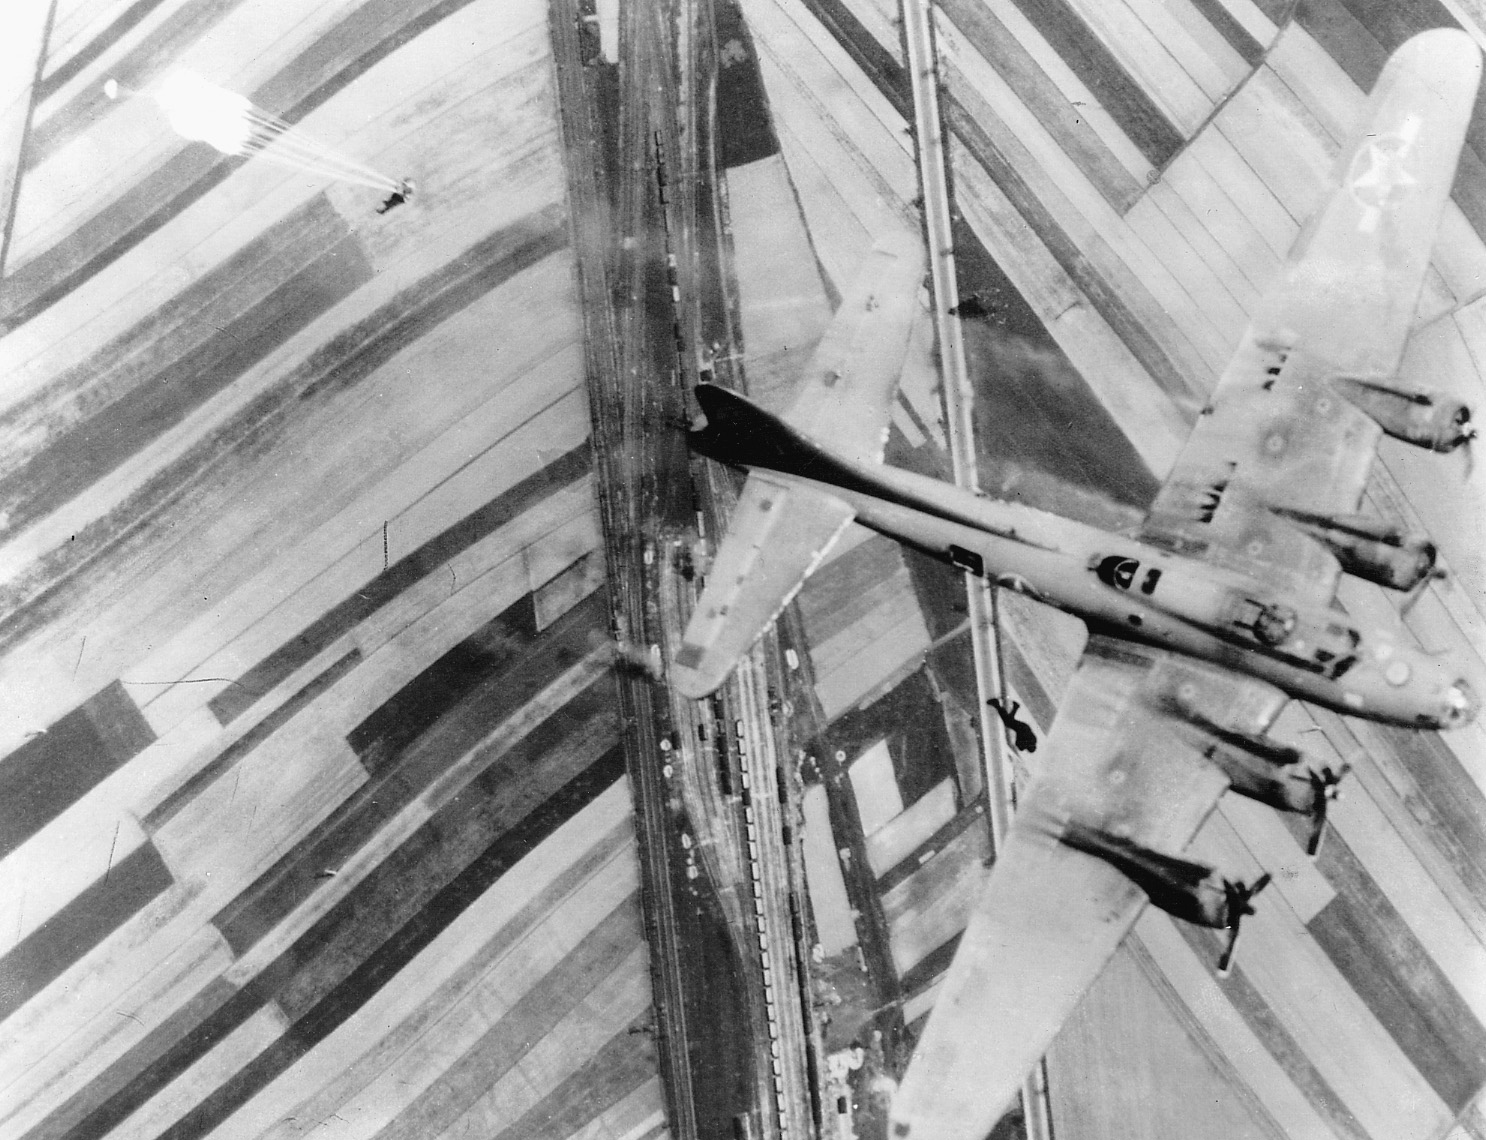 Two members of a B-17 bomber crew bail out of their stricken craft over a patchwork countryside in Germany.  